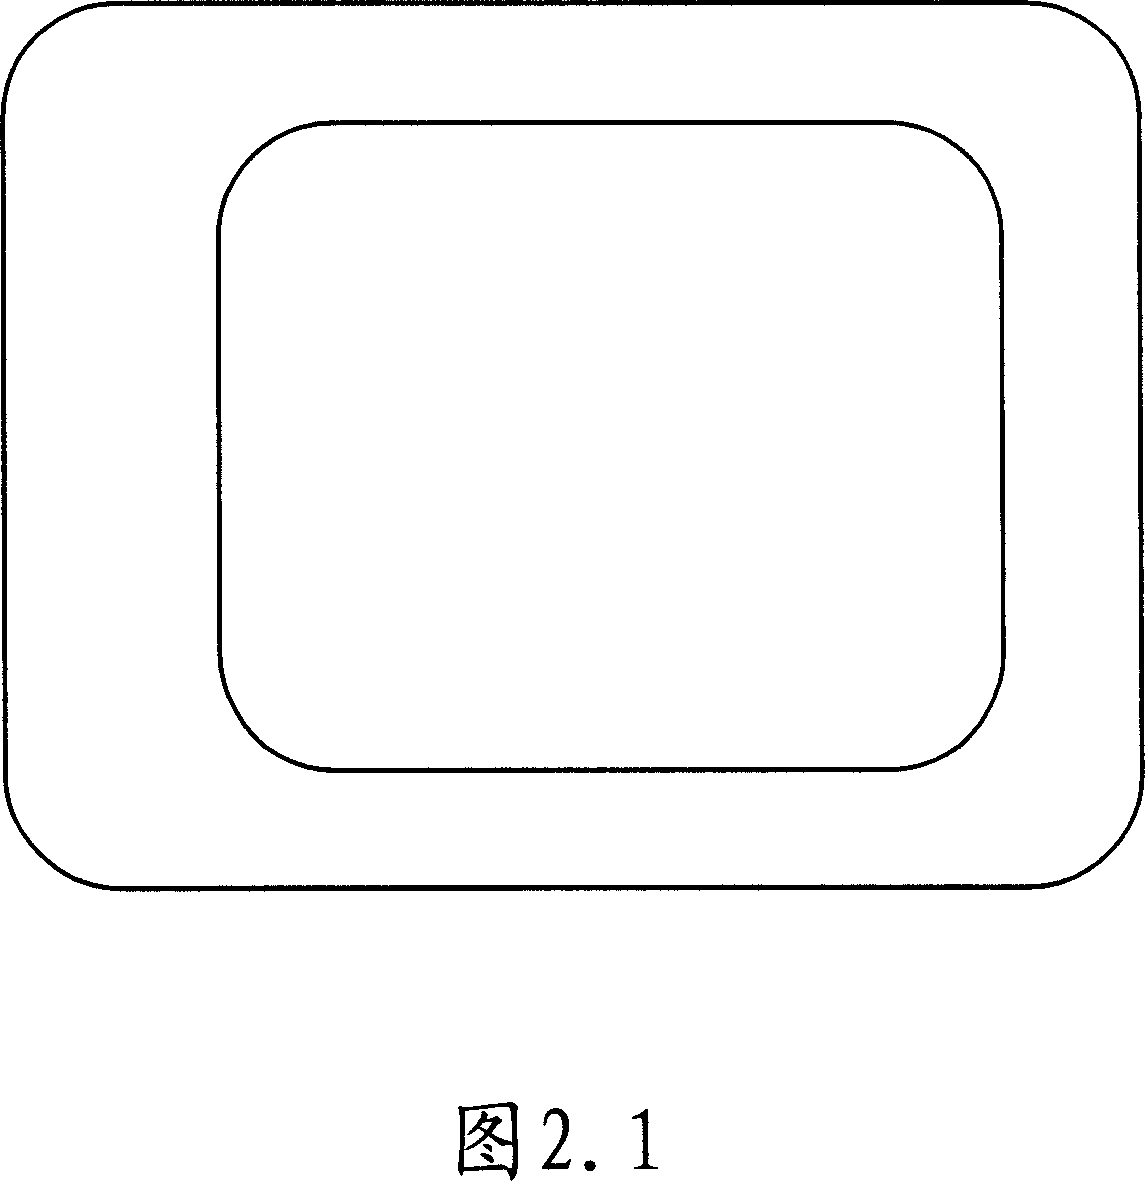 Method for making stainless steel ware